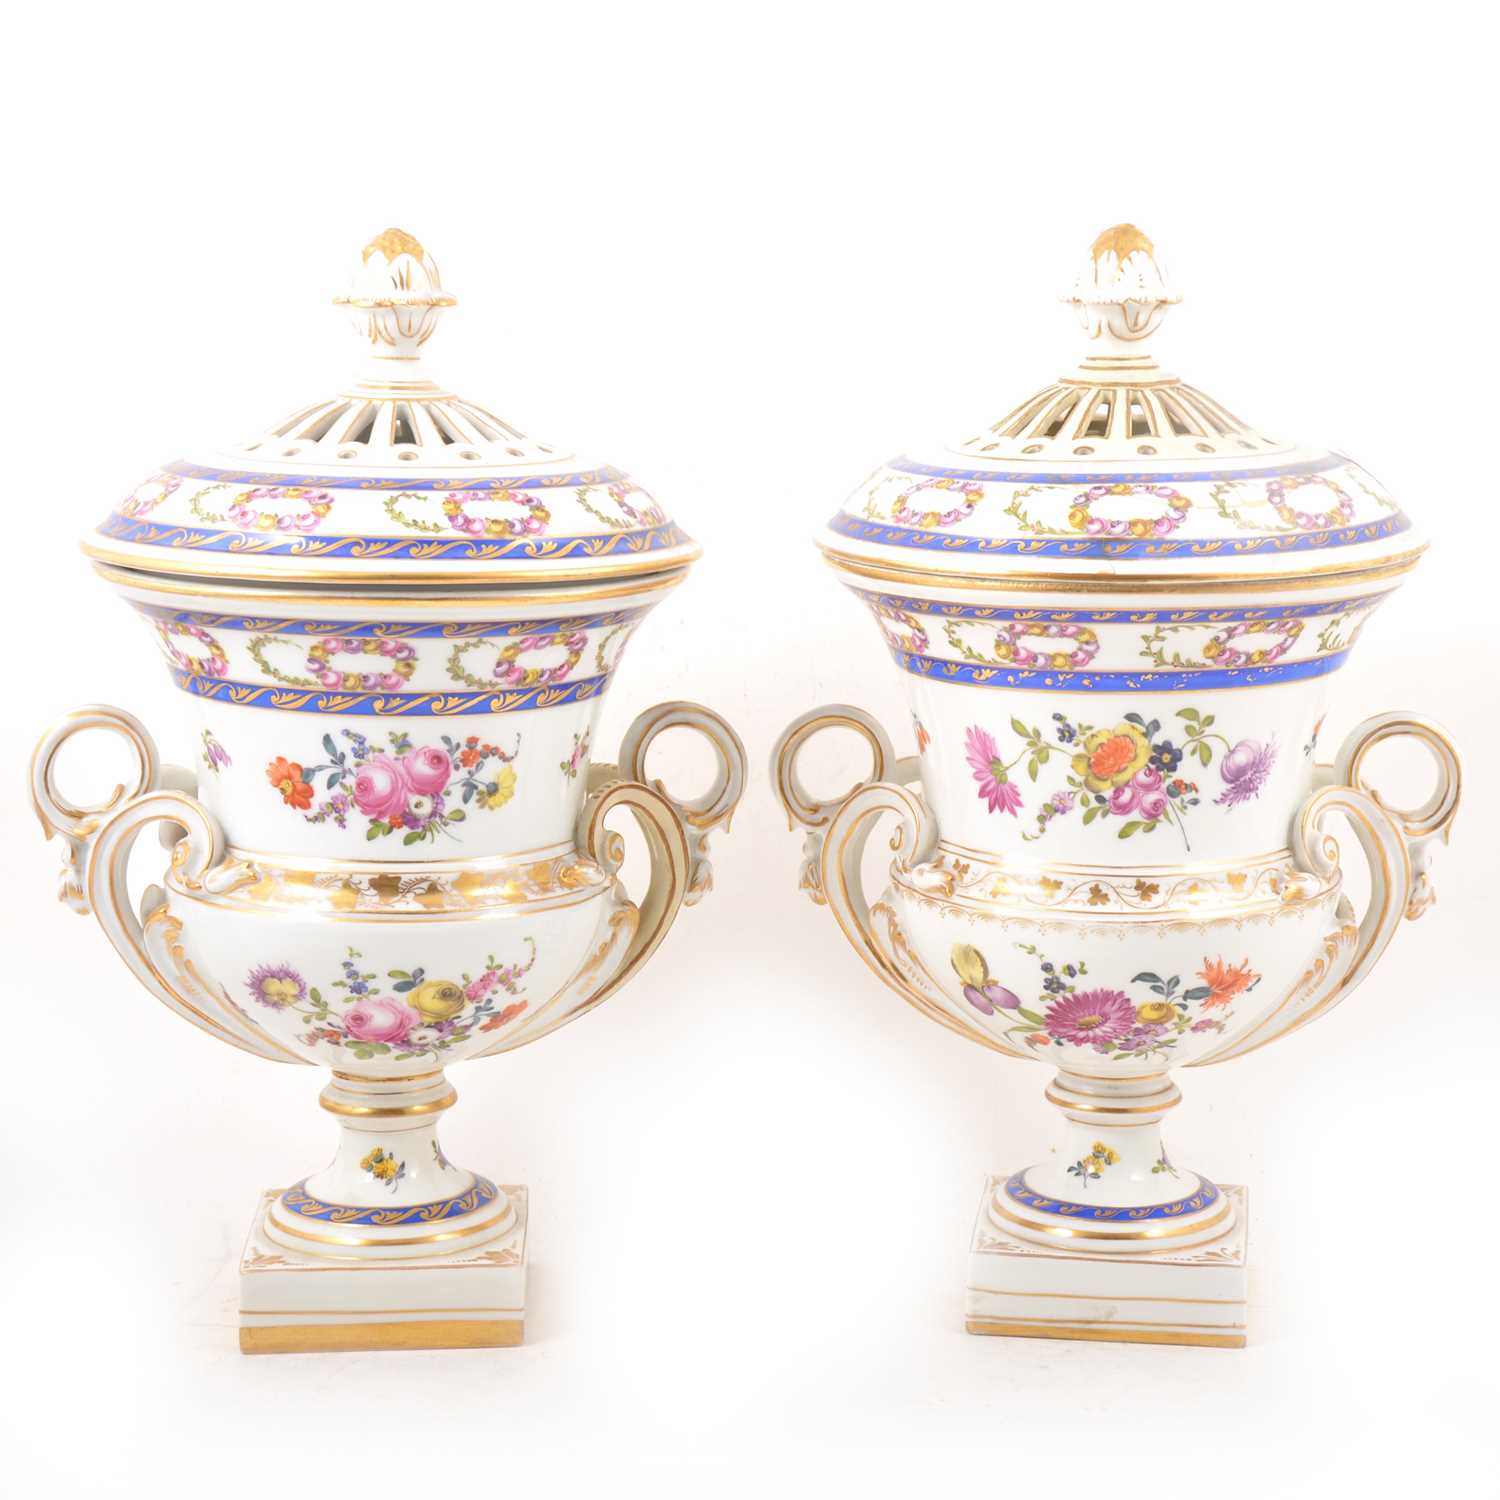 Lot 17 - Pair of Continental porcelain campagna shape urns